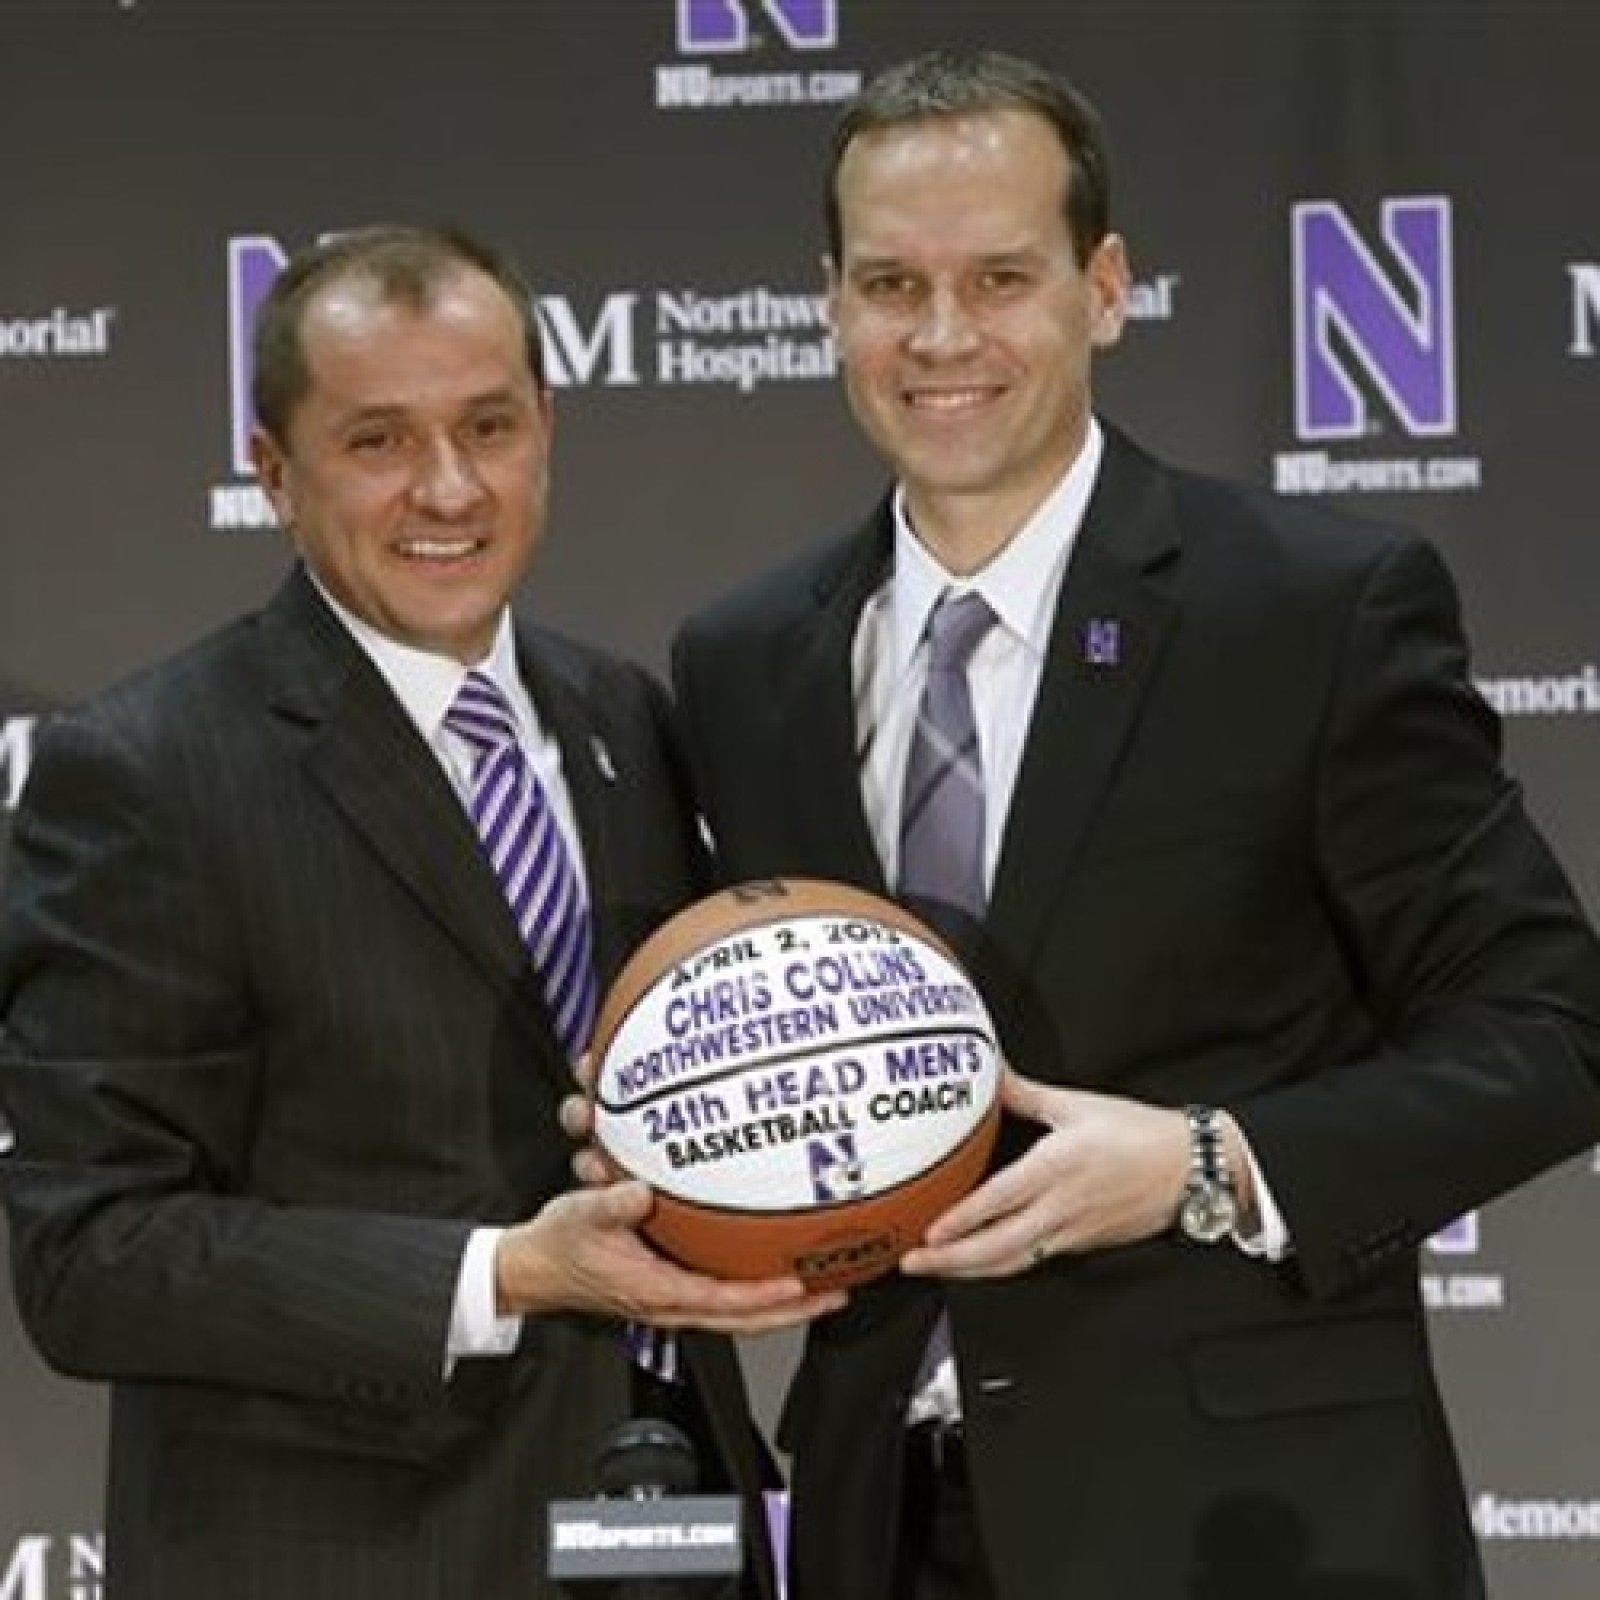 Northwestern’s Coach Collins speaks on his new role and hoops history ...